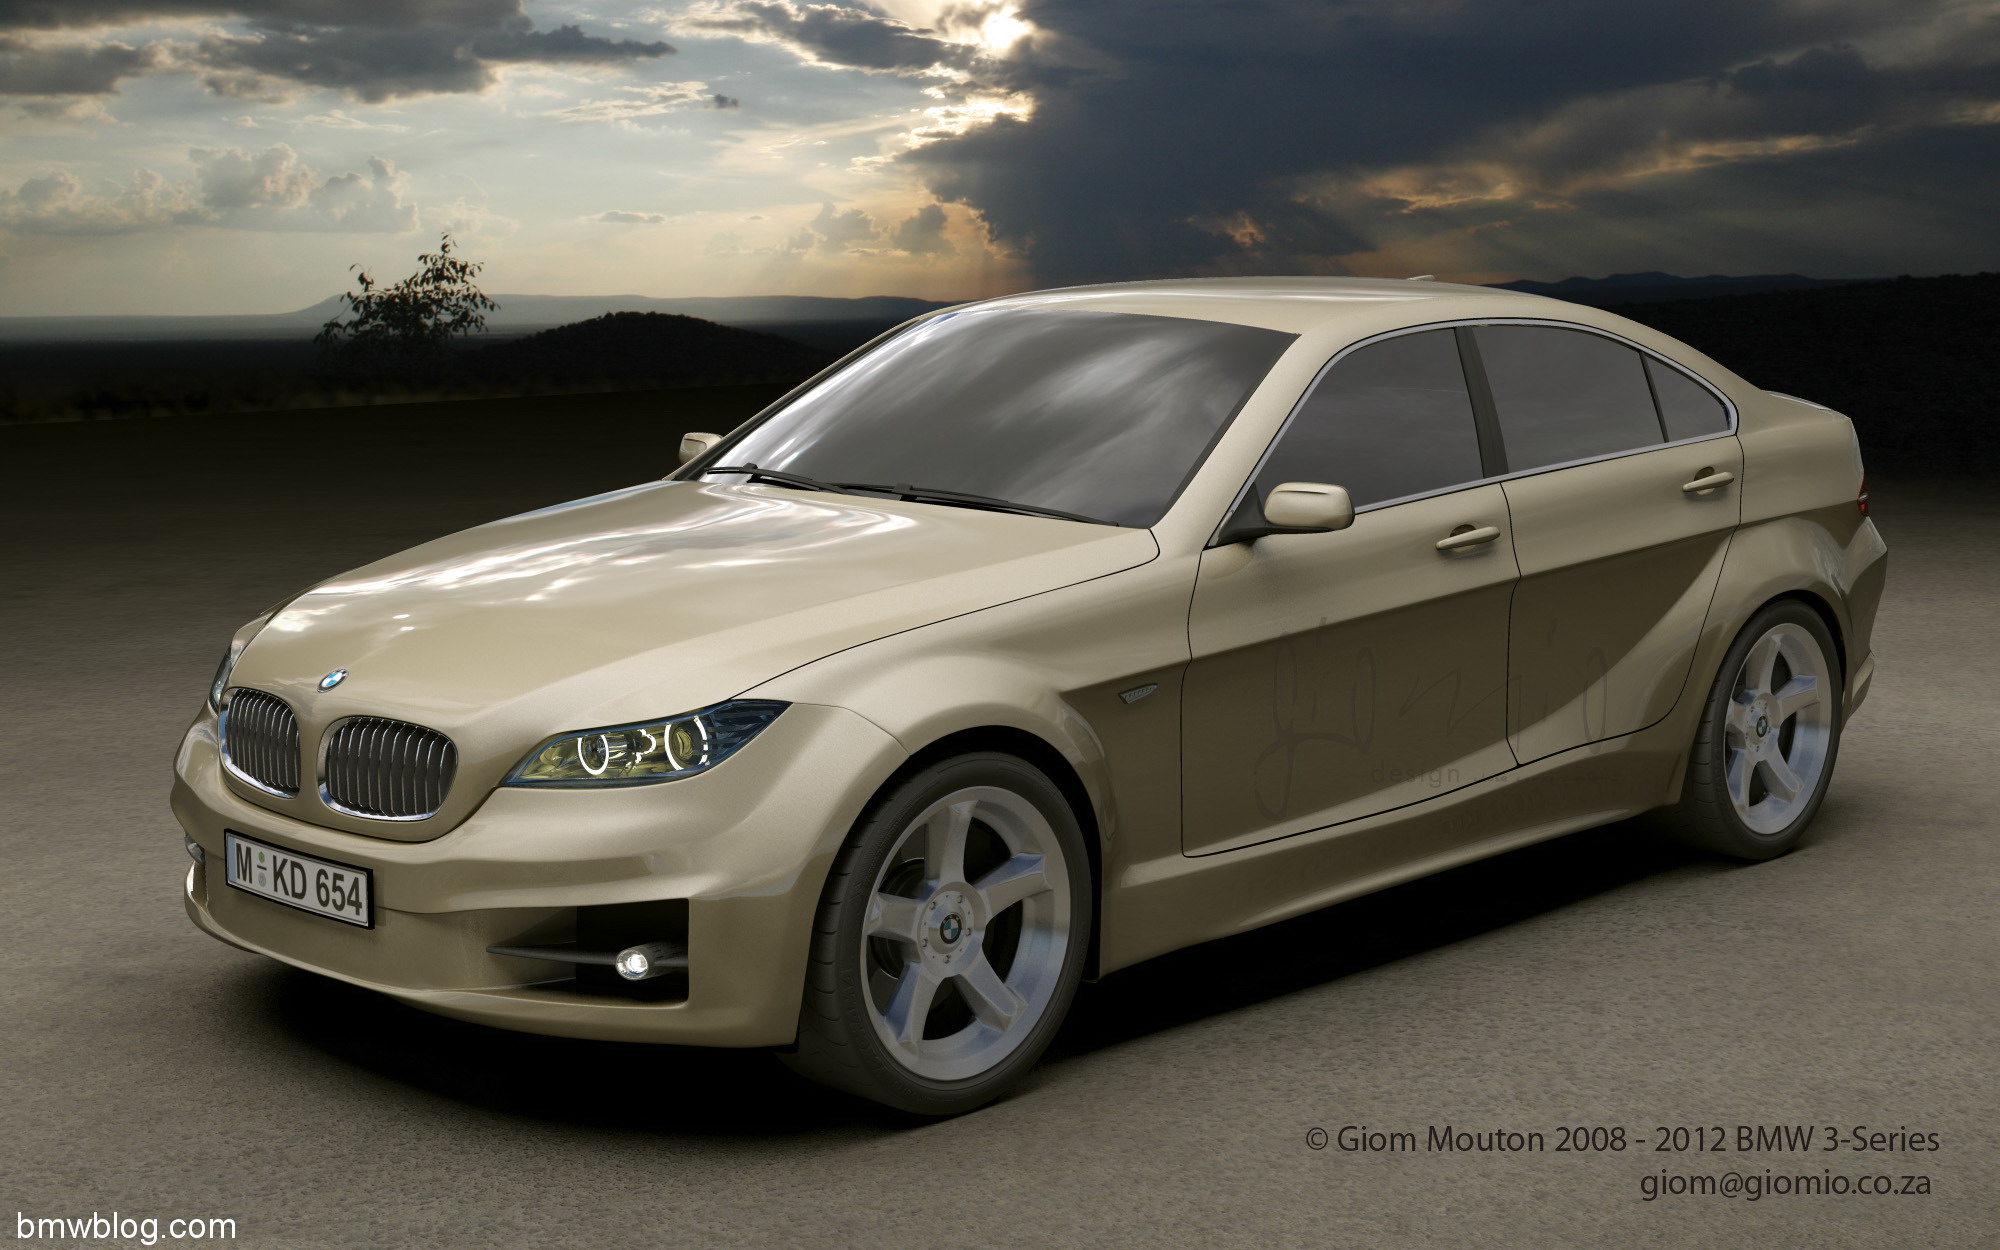 BMW 530i 2012 Review, Amazing Pictures and Images Look